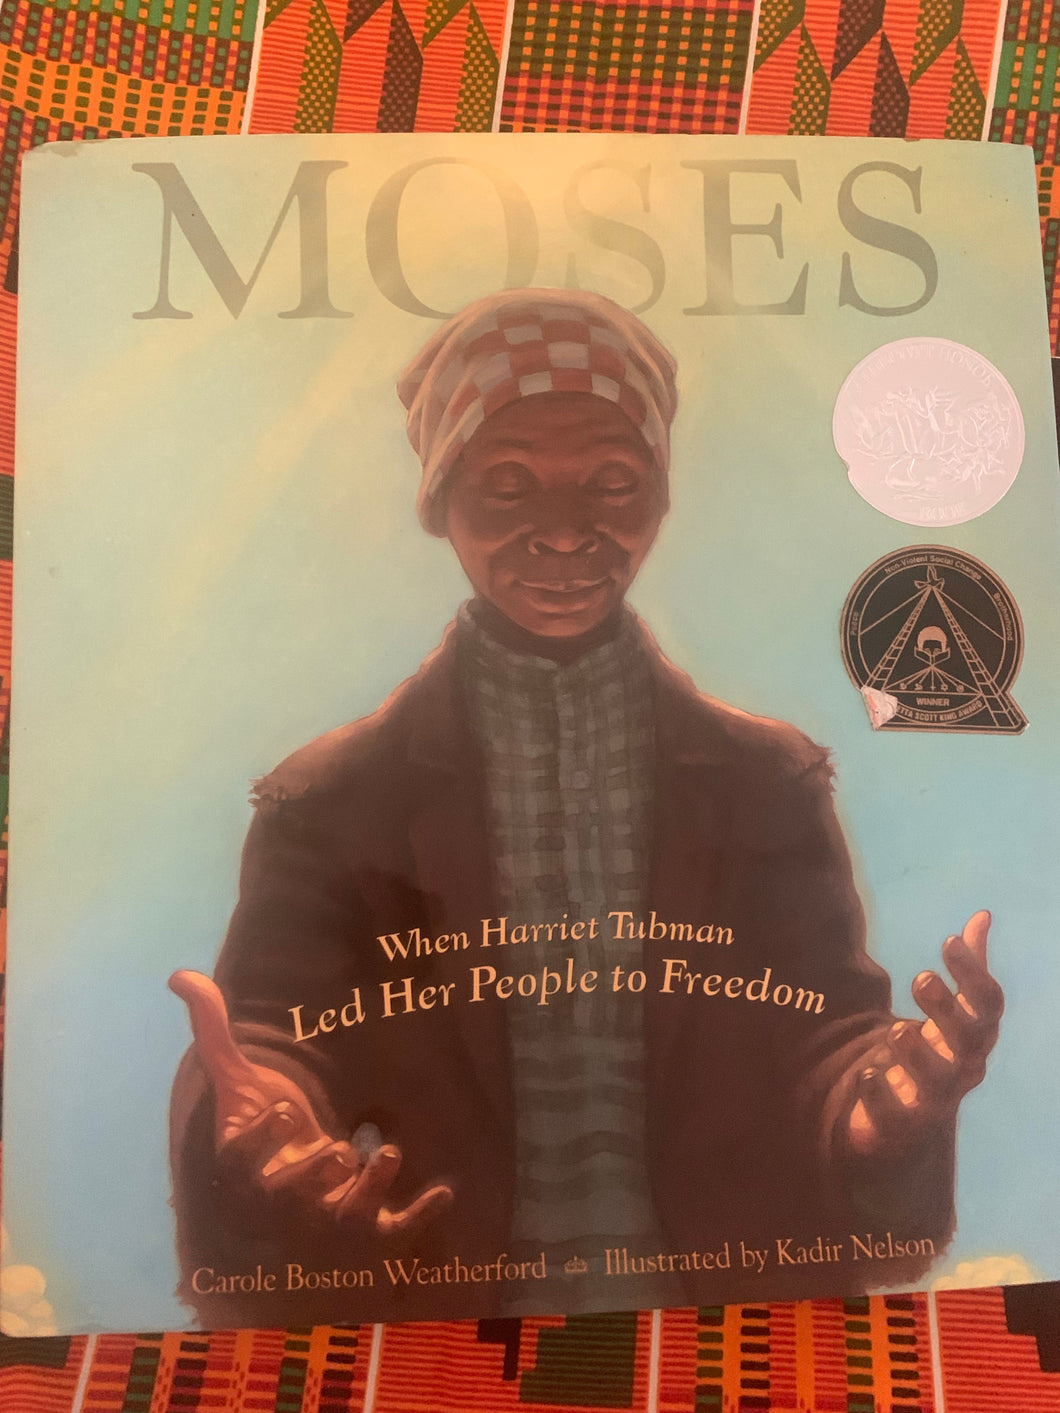 Moses. When Harriet Tubman Led Her People to Freedom. By Carole Boston Weatherford (Used)